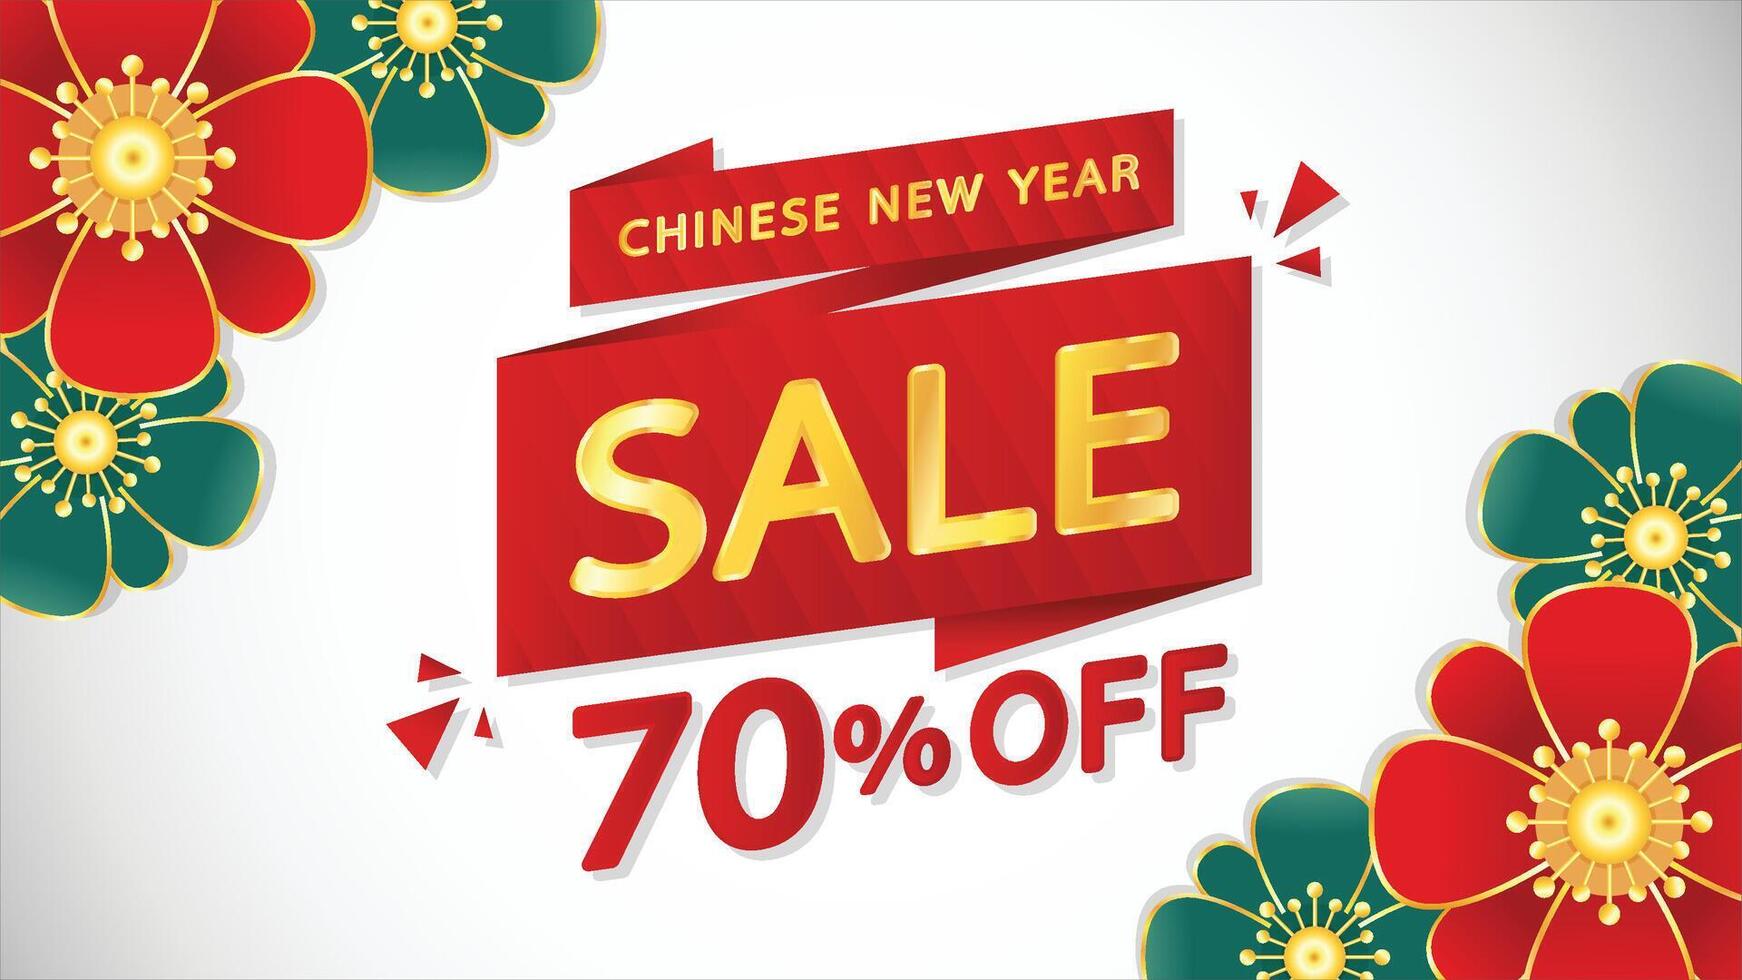 Lunar new year wallpaper. Chinese background vector. Chinese new year sale poster. vector